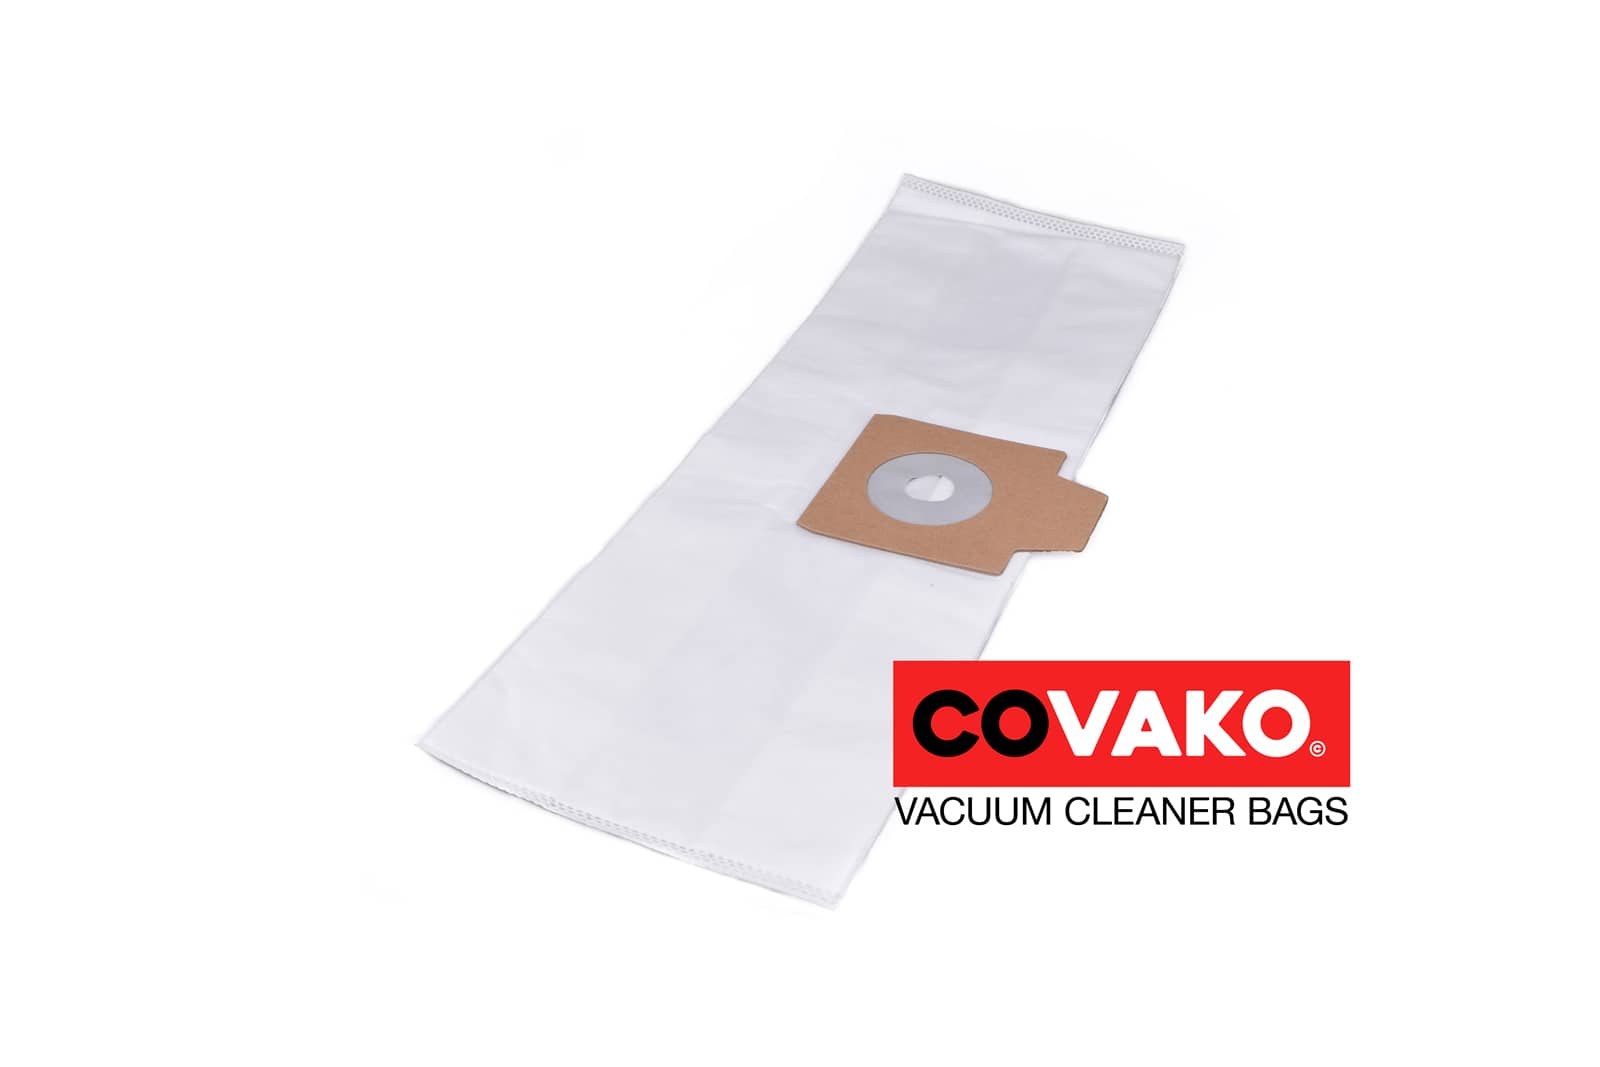 Electrolux UZ 934 / Synthesis - Electrolux vacuum cleaner bags